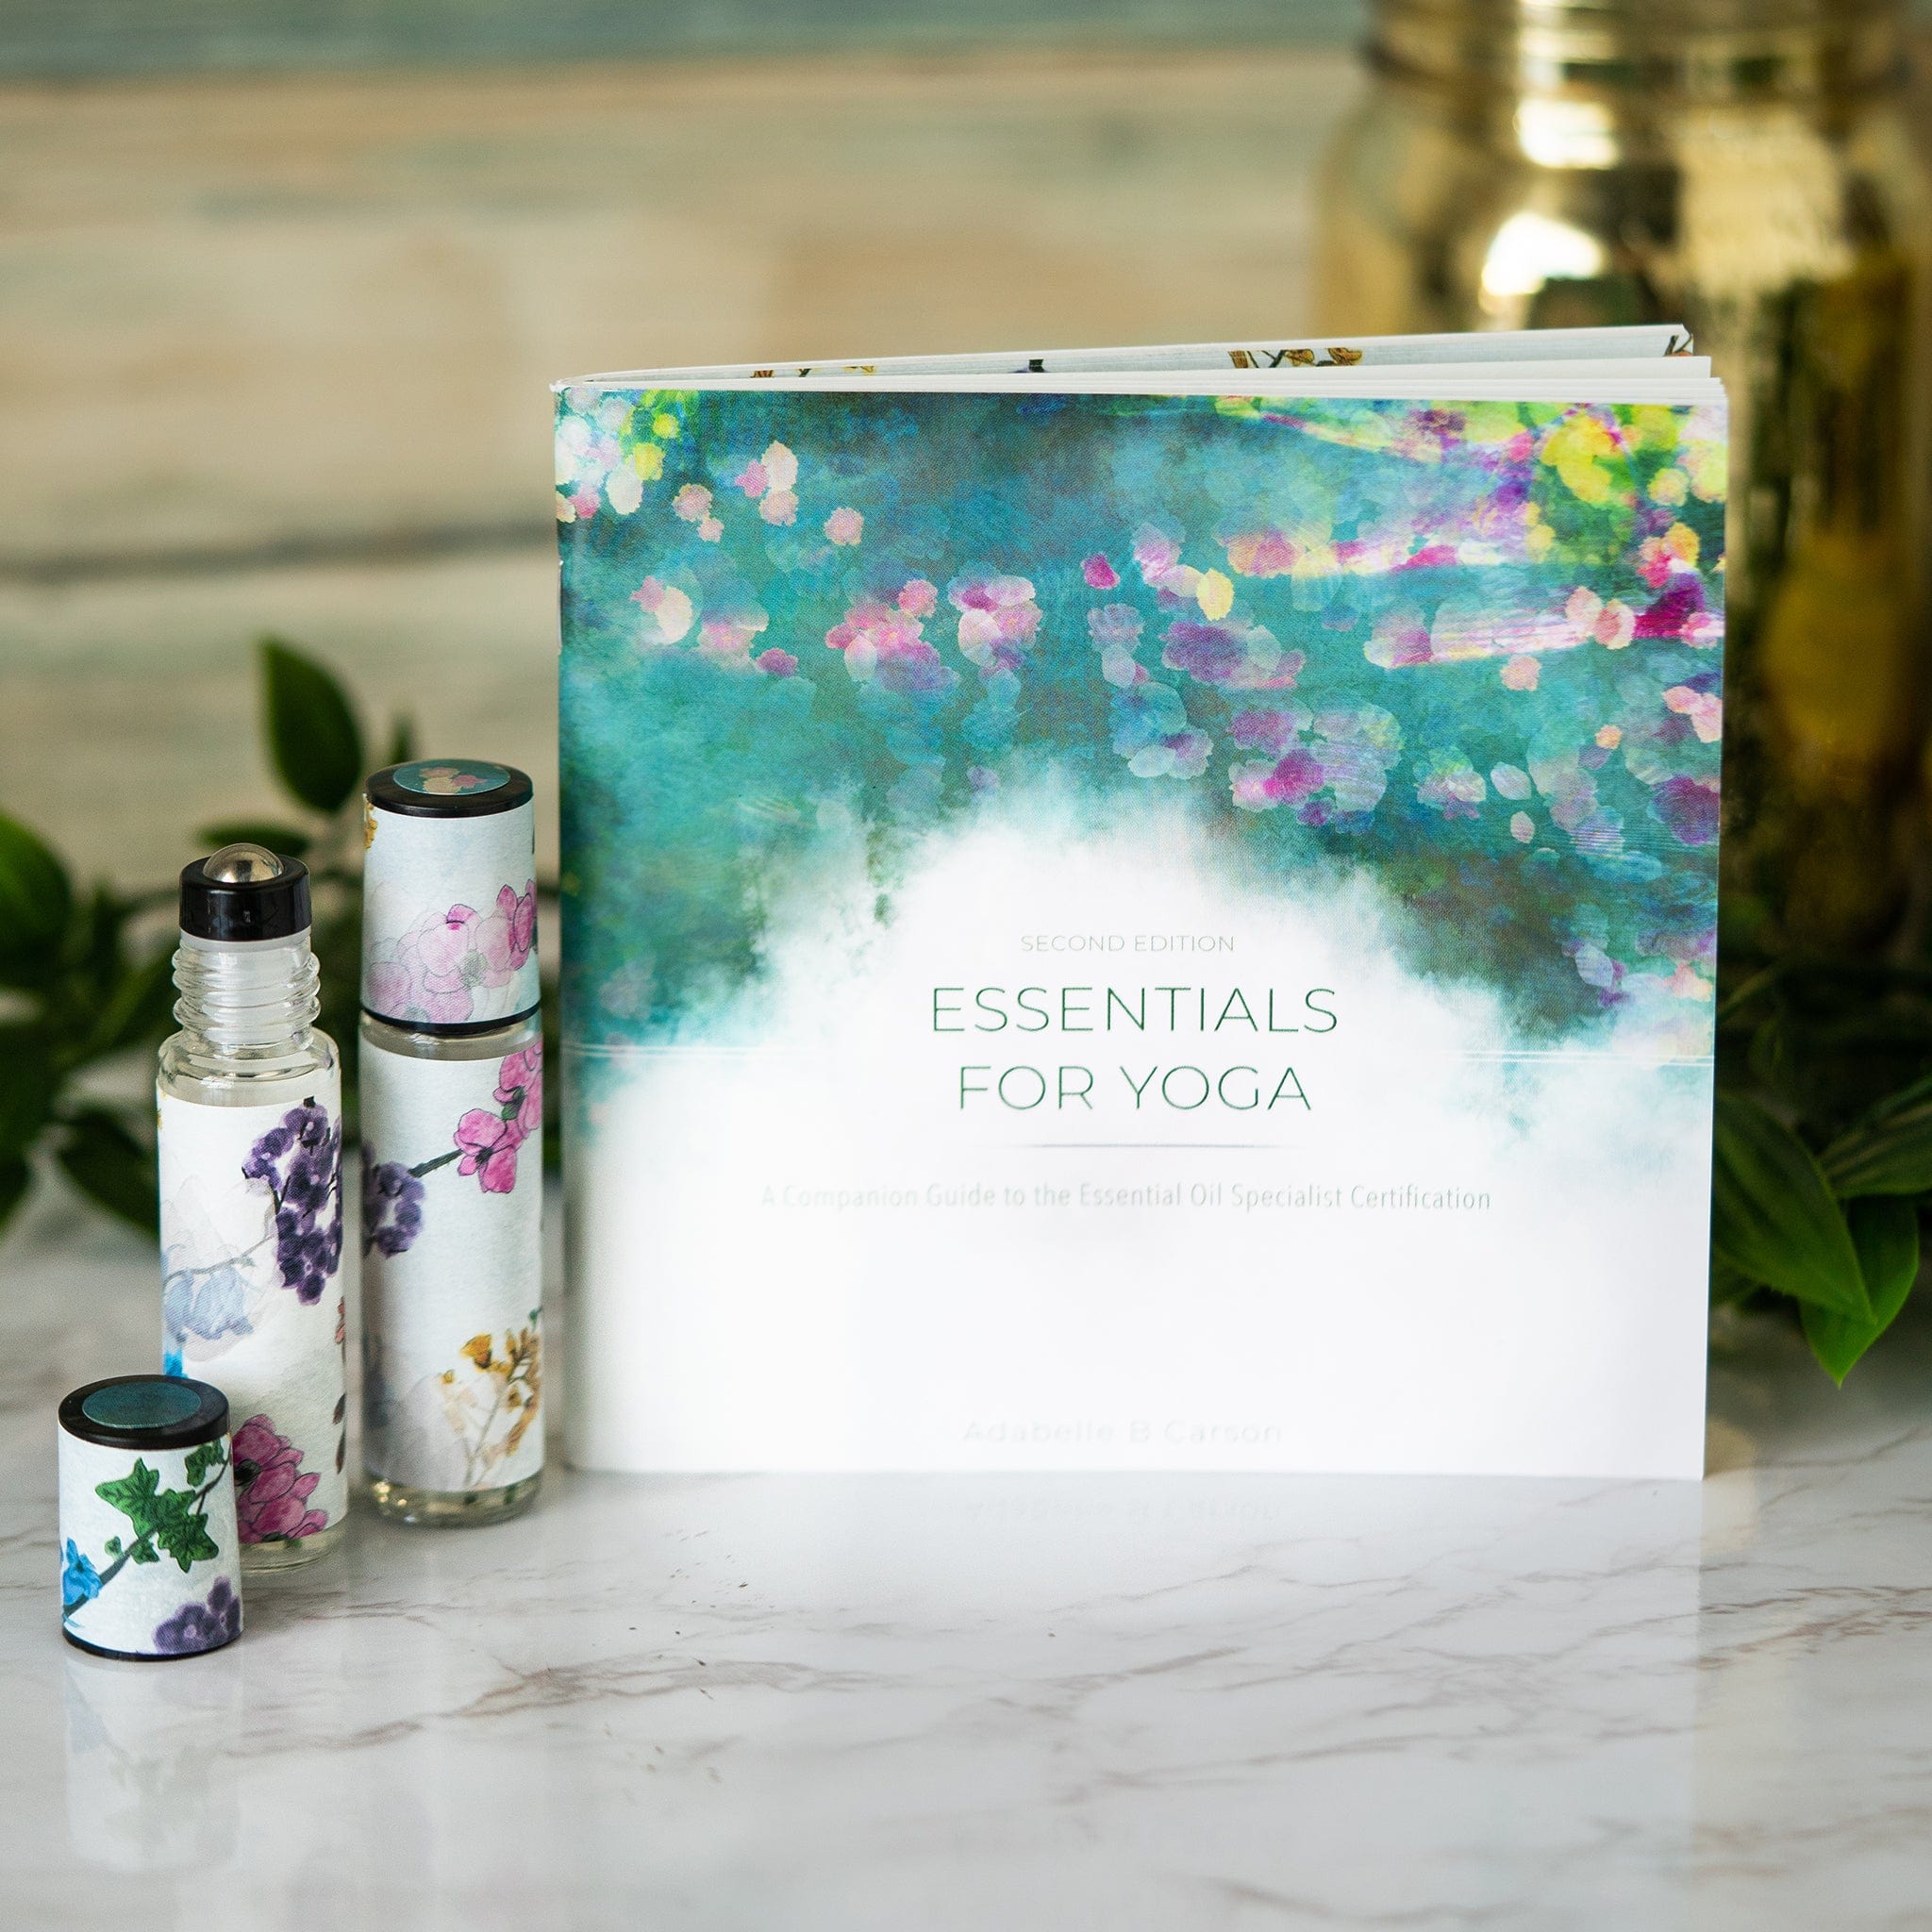 Essentials for Yoga: A Companion Guide to the Essential Oil Specialist -  Oil Life